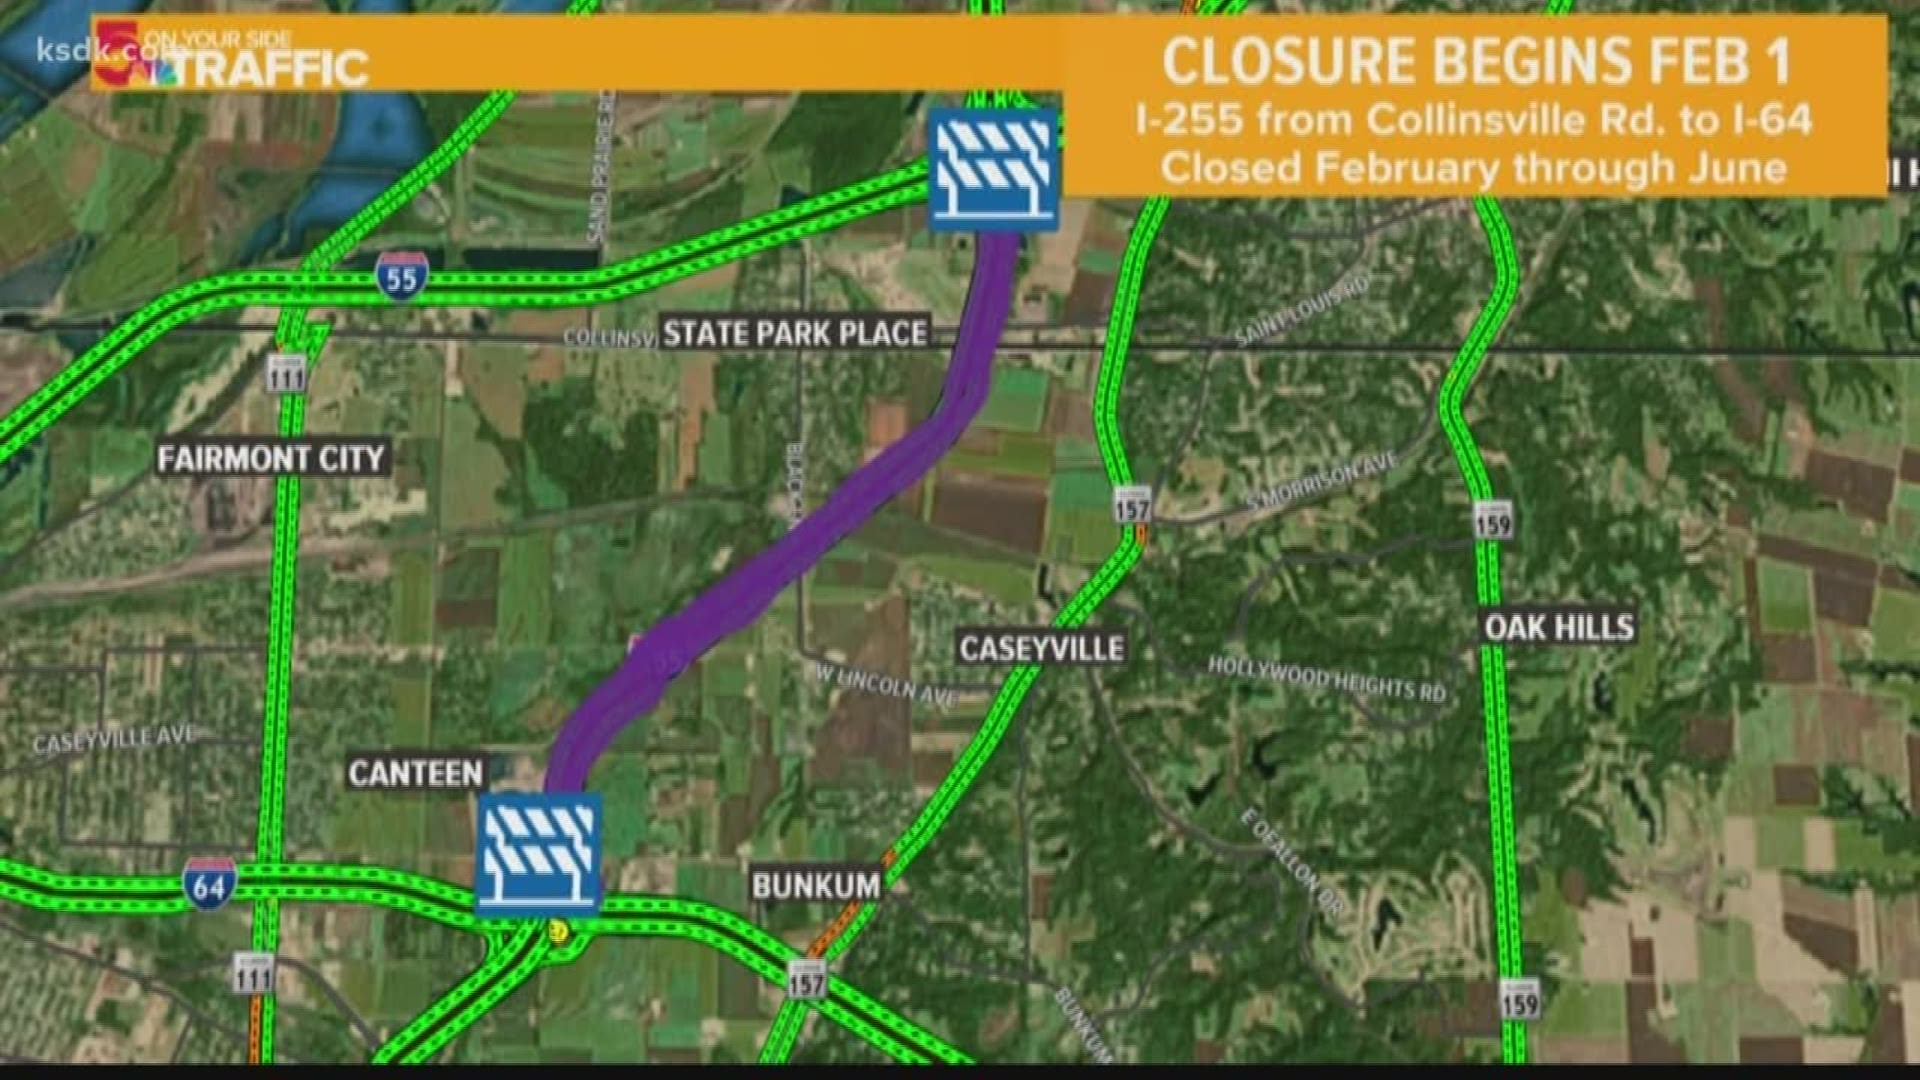 The interstate will be closed between Collinsville Road and Interstate 64 for several months of construction